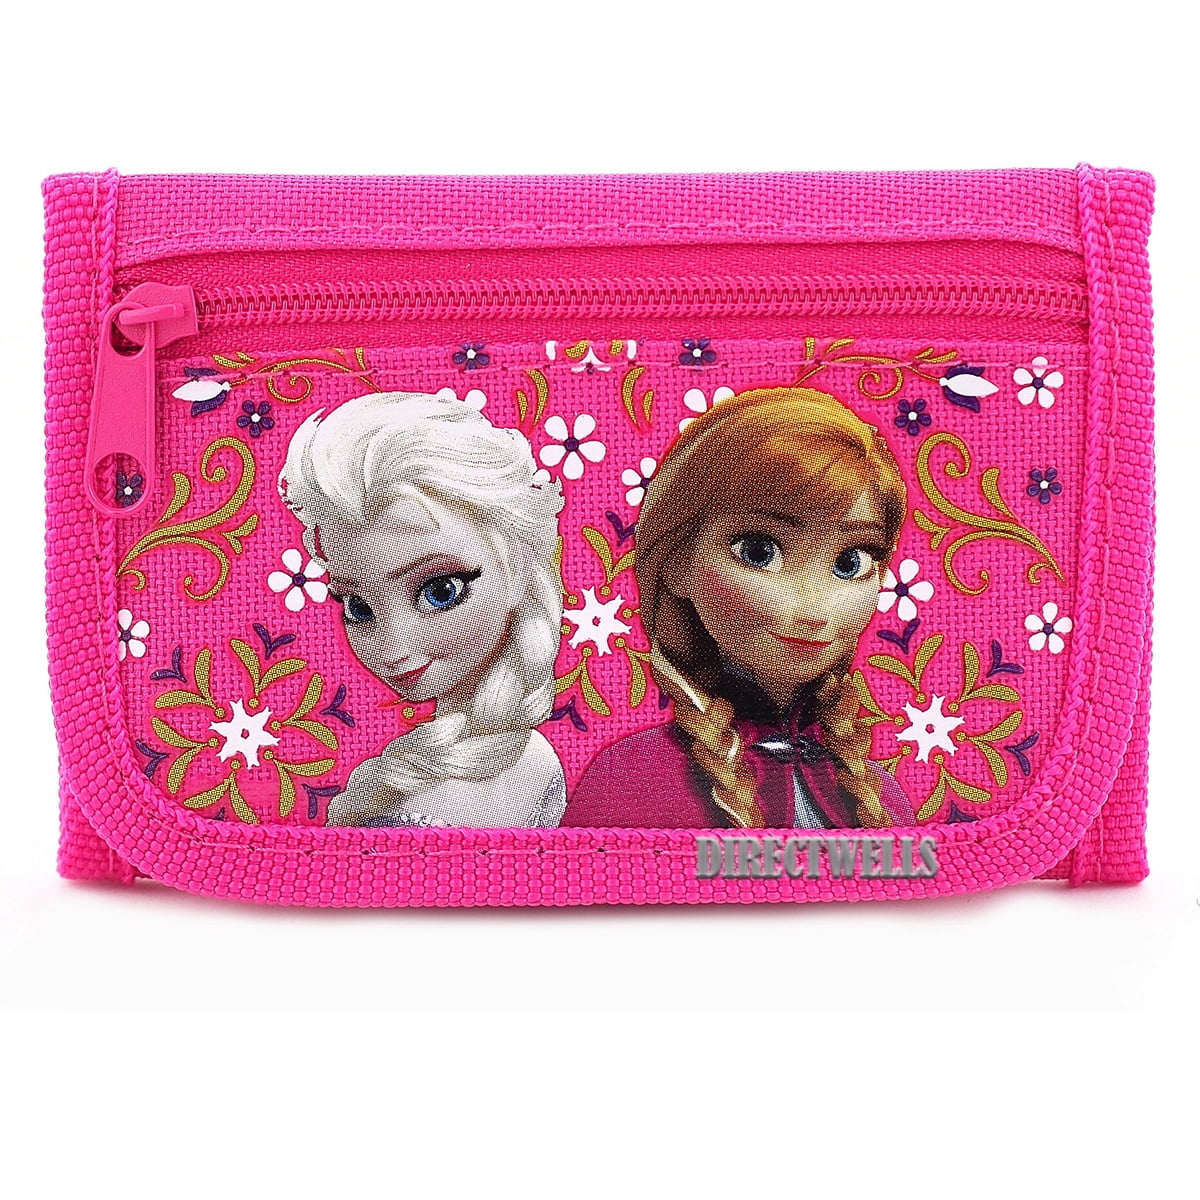 Frozen Elsa and Anna Authentic Licensed Hot Pink Trifold Wallet f68d1352 bbe6 46de a4c4 29c623b80186 1.b649ff11ae2e4bbf3bc25026fca87a4e